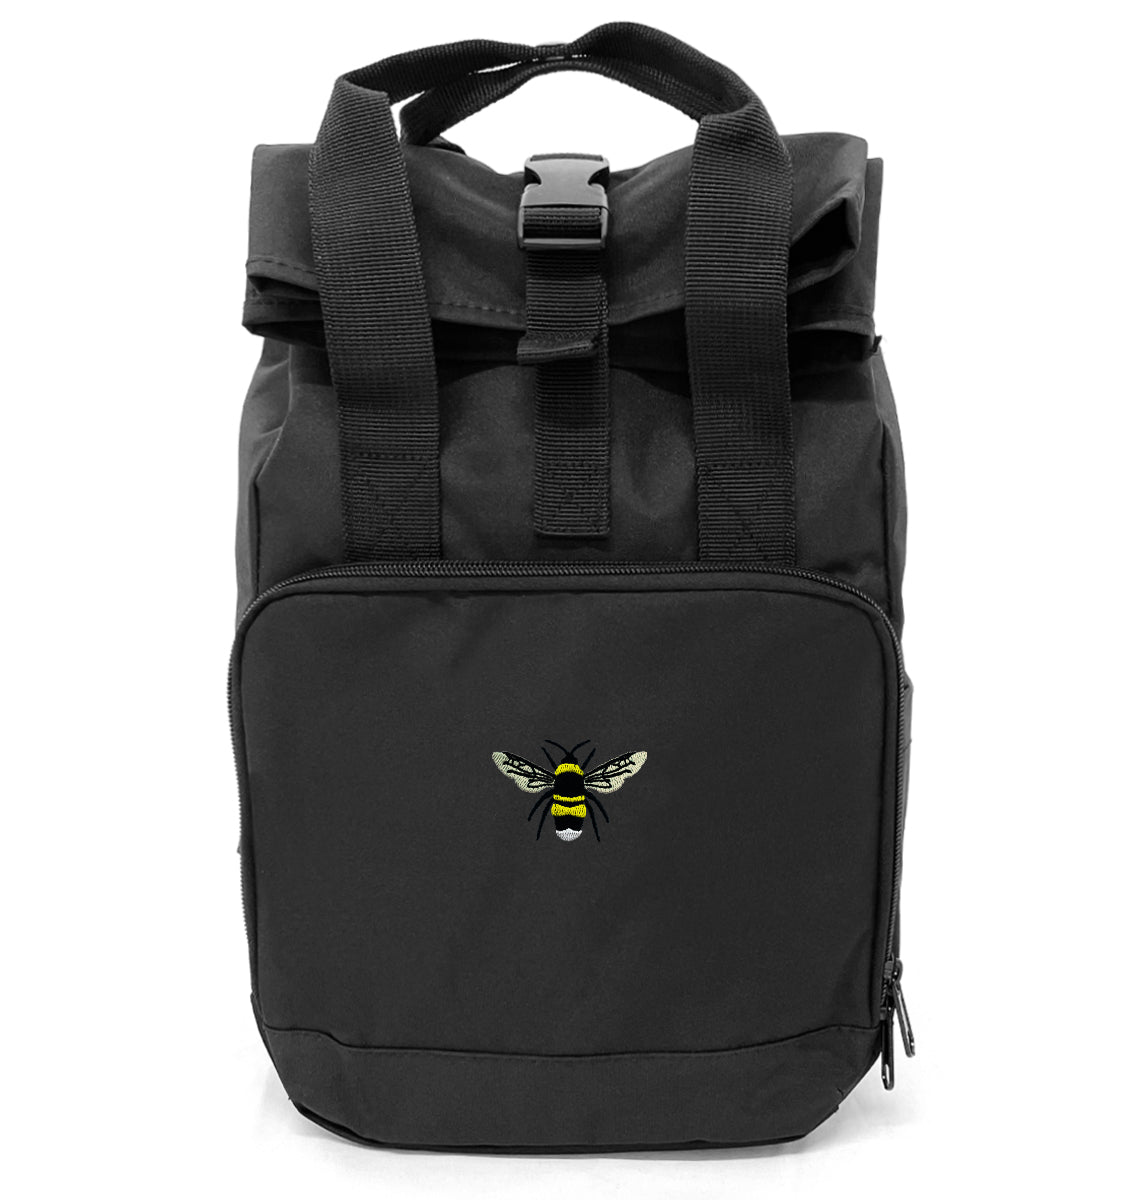 Bumble Bee Mini Roll-top Recycled Backpack - Blue Panda